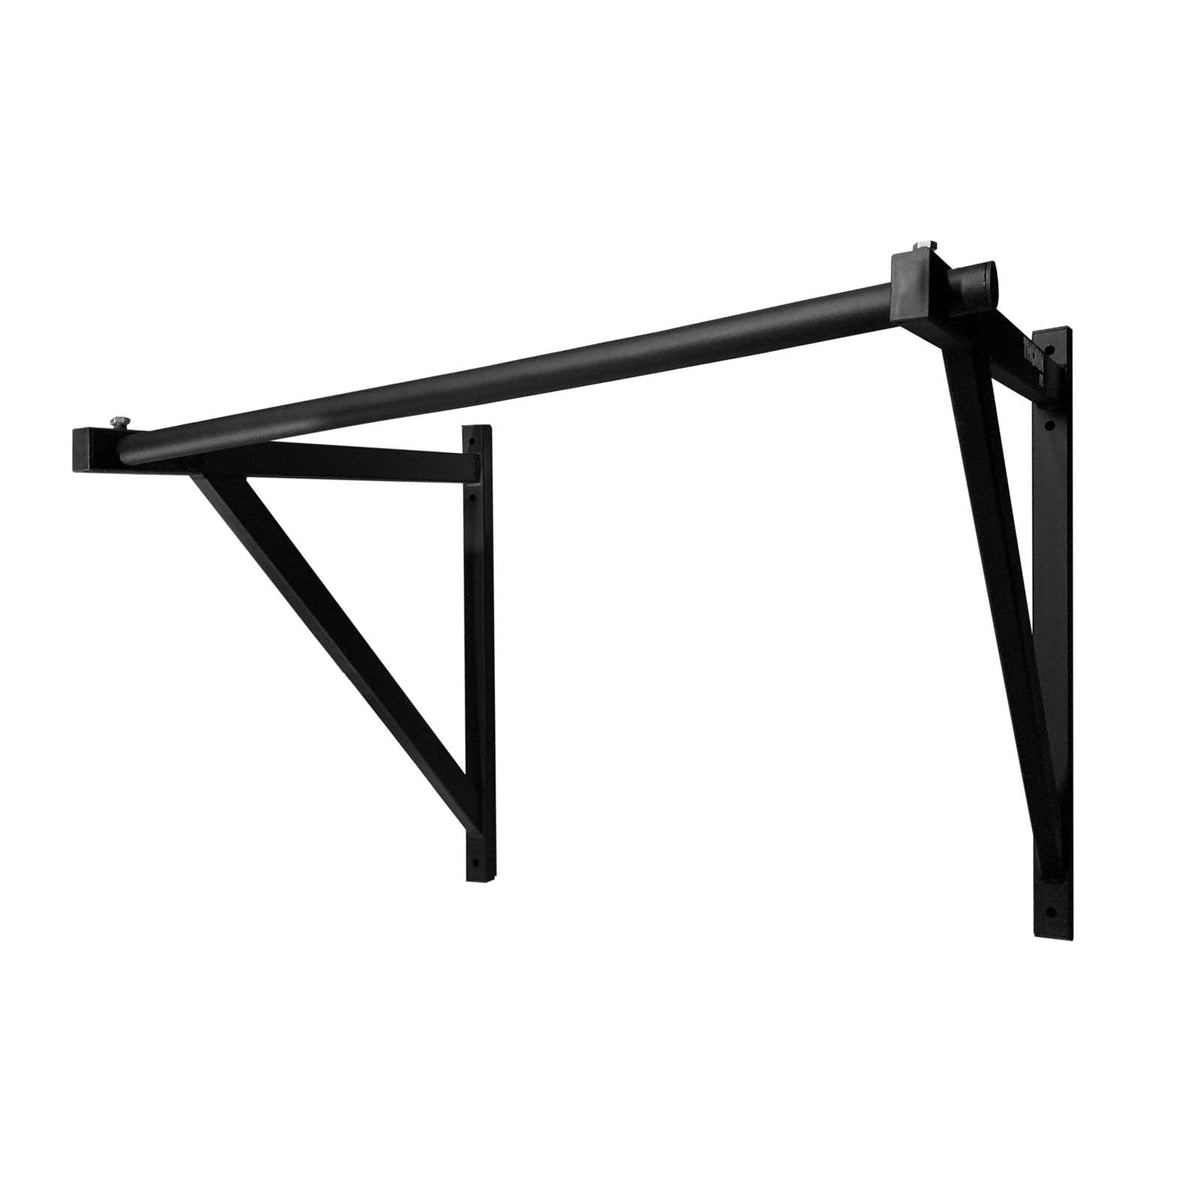 Thorn Fit Pull-up bar